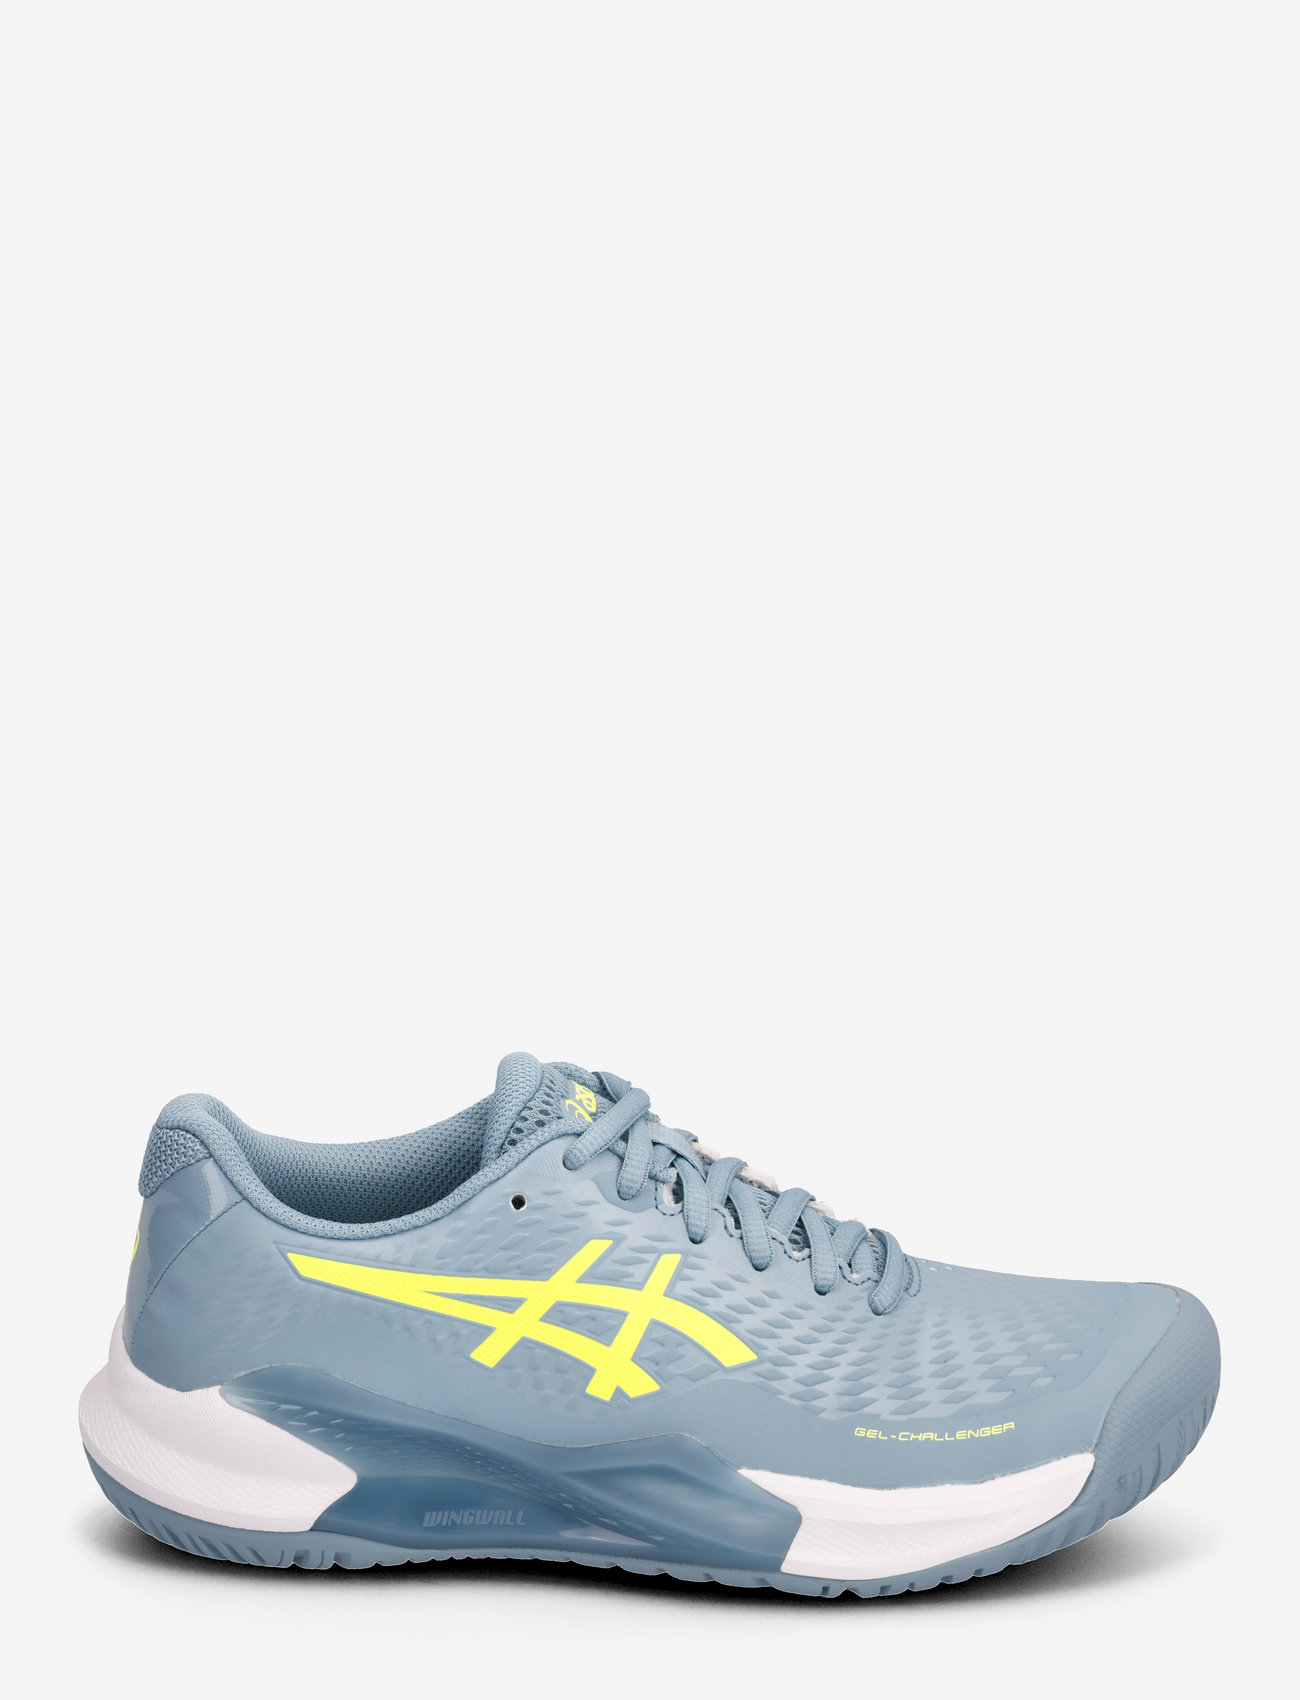 Asics - GEL-CHALLENGER 14 - racketsports shoes - gris blue/safety yellow - 1